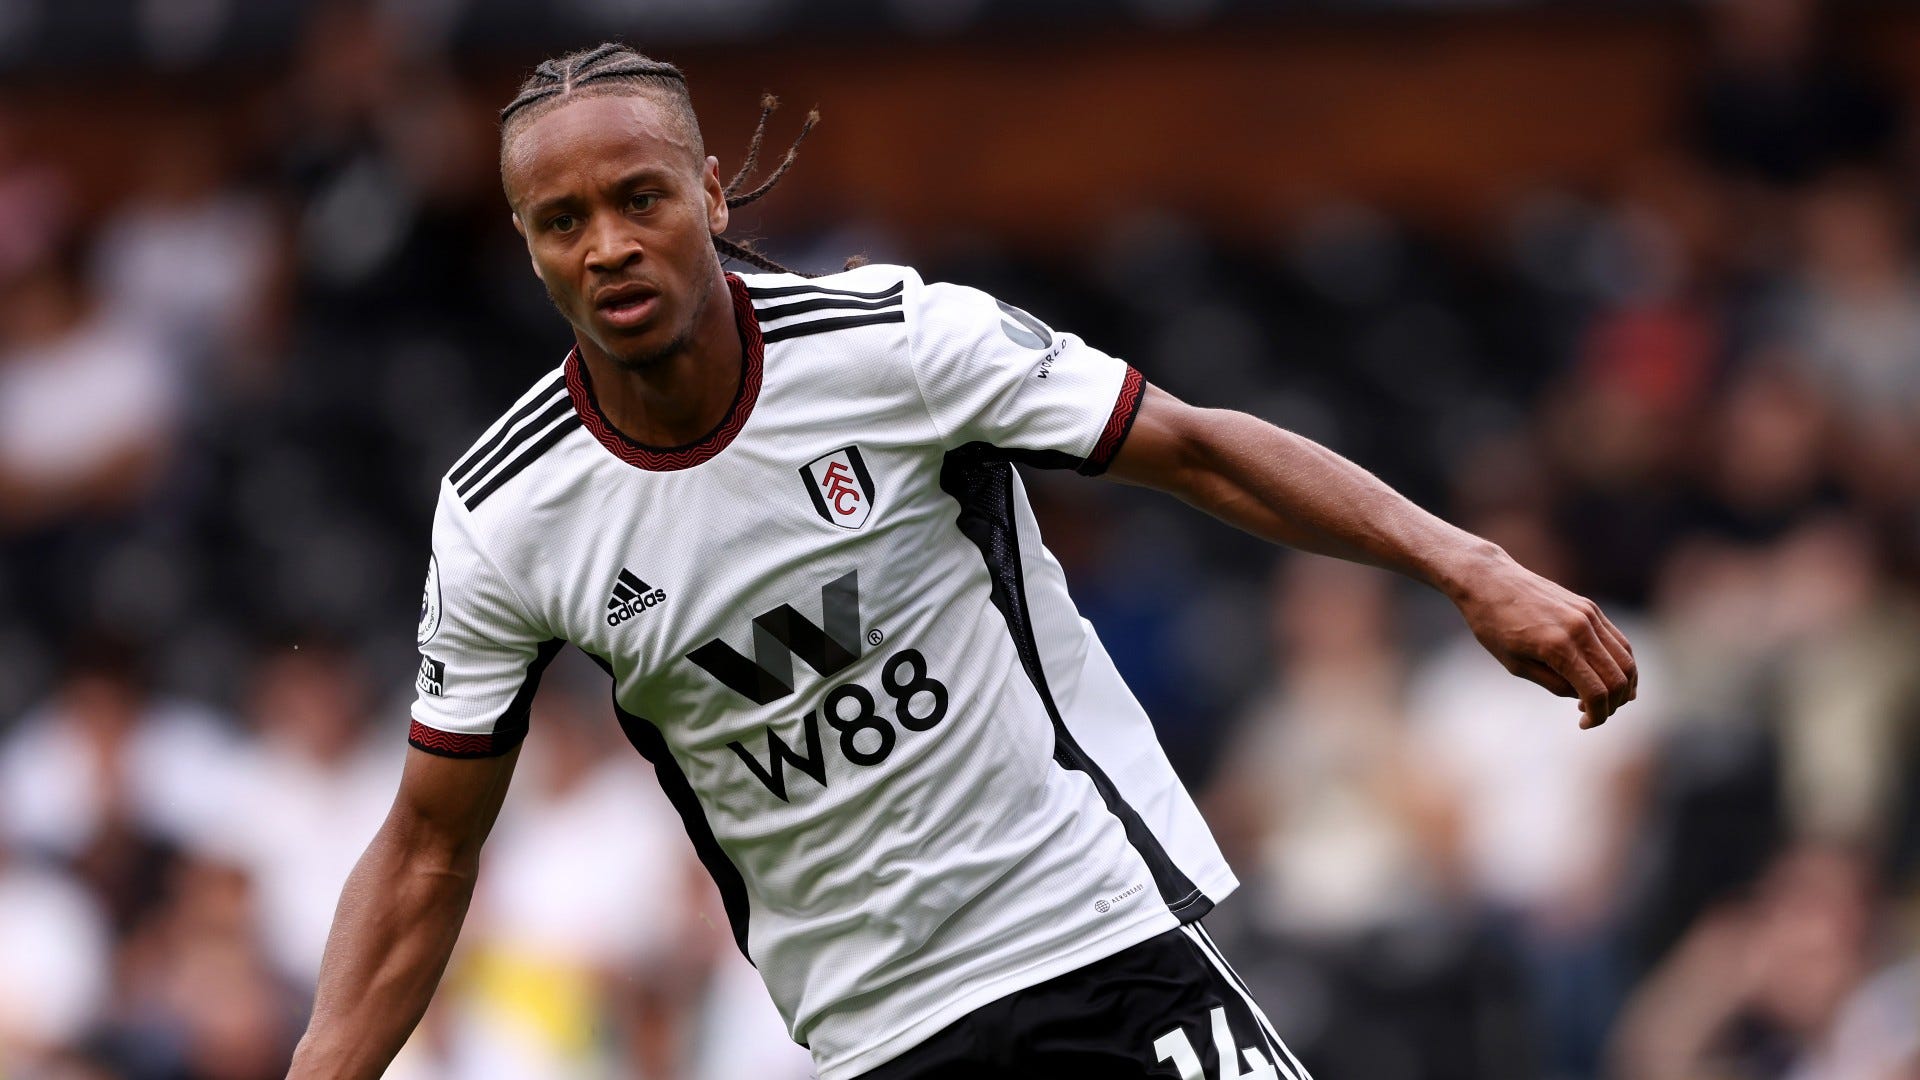 Fulham vs Aston Villa Live stream, TV channel, kick-off time and how to watch Goal